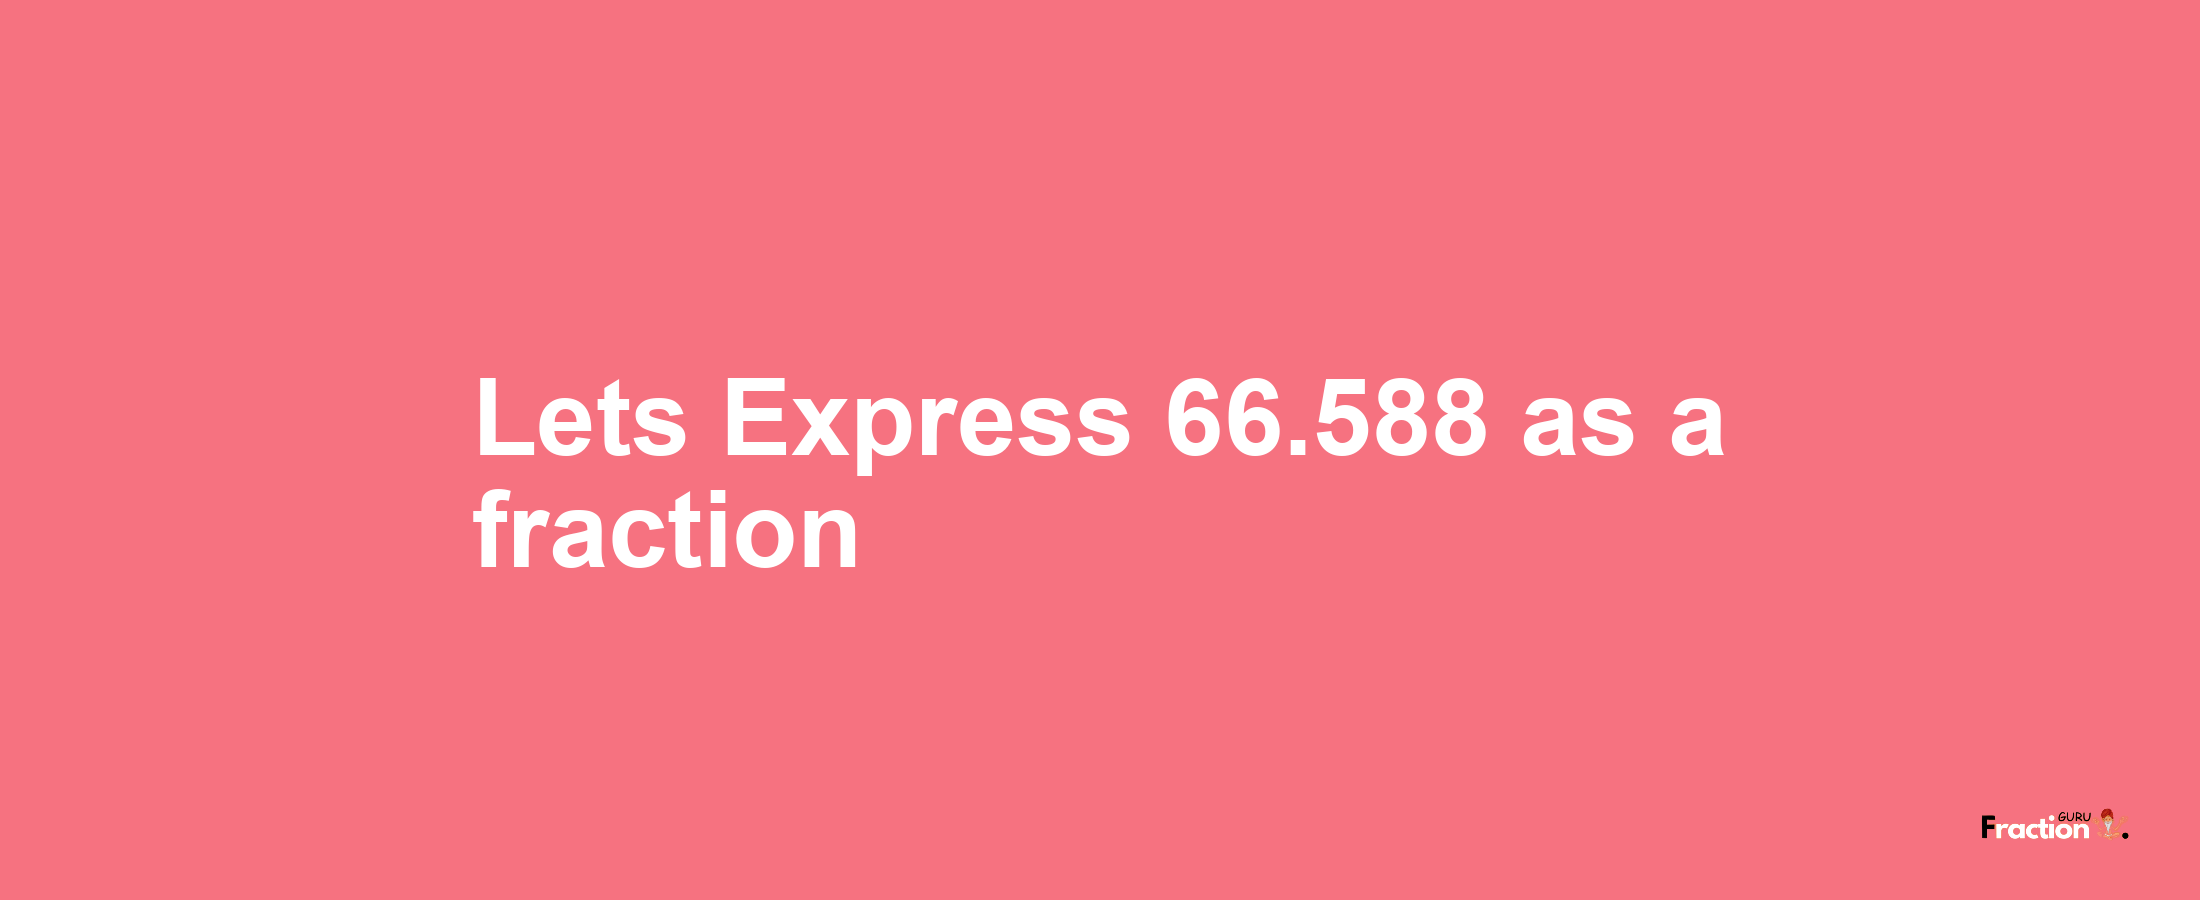 Lets Express 66.588 as afraction